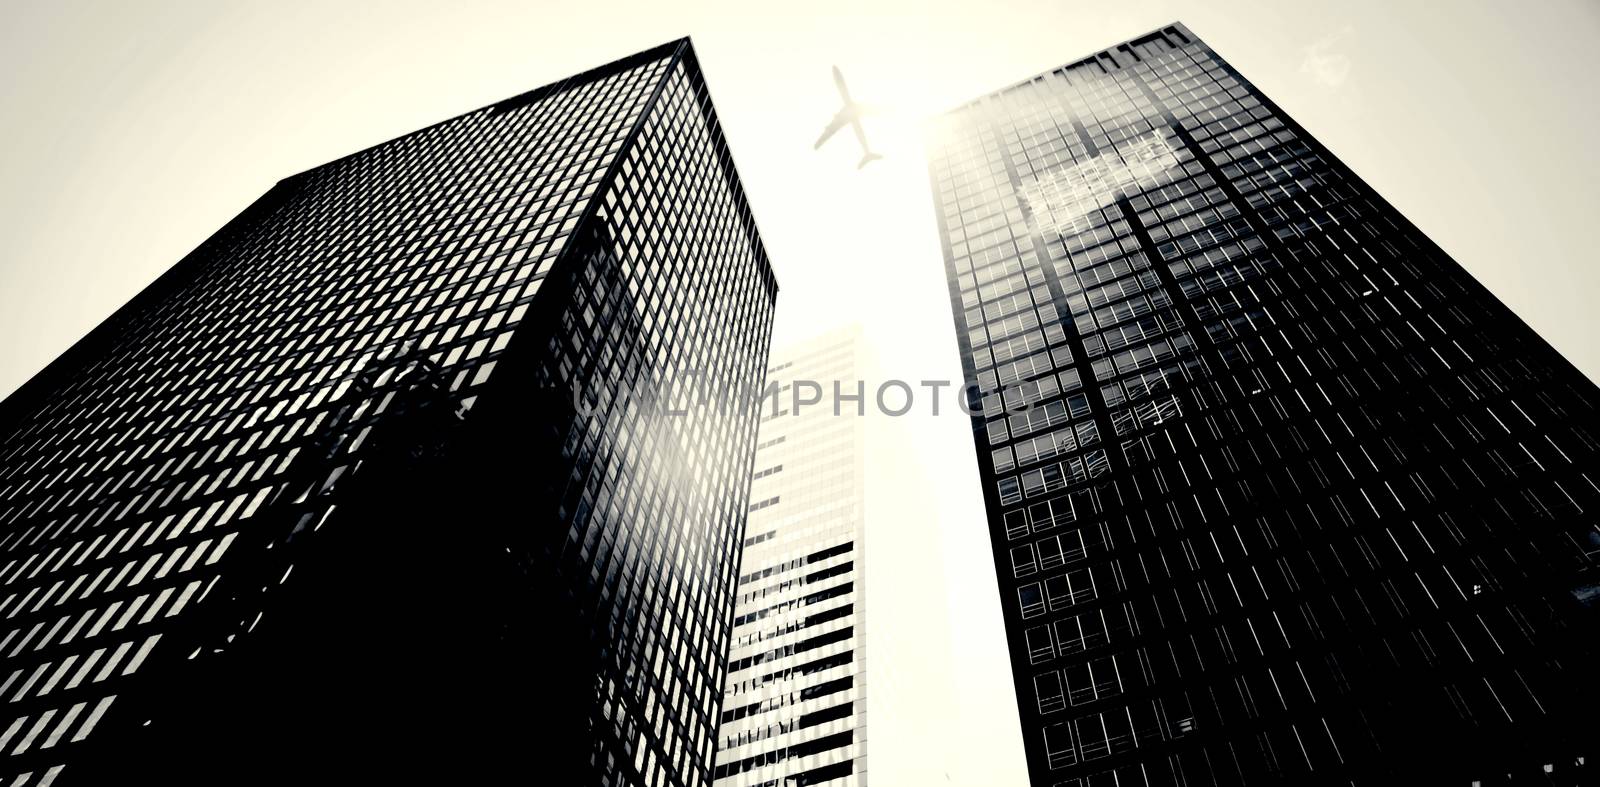 An airplane flying over buildings by Wavebreakmedia